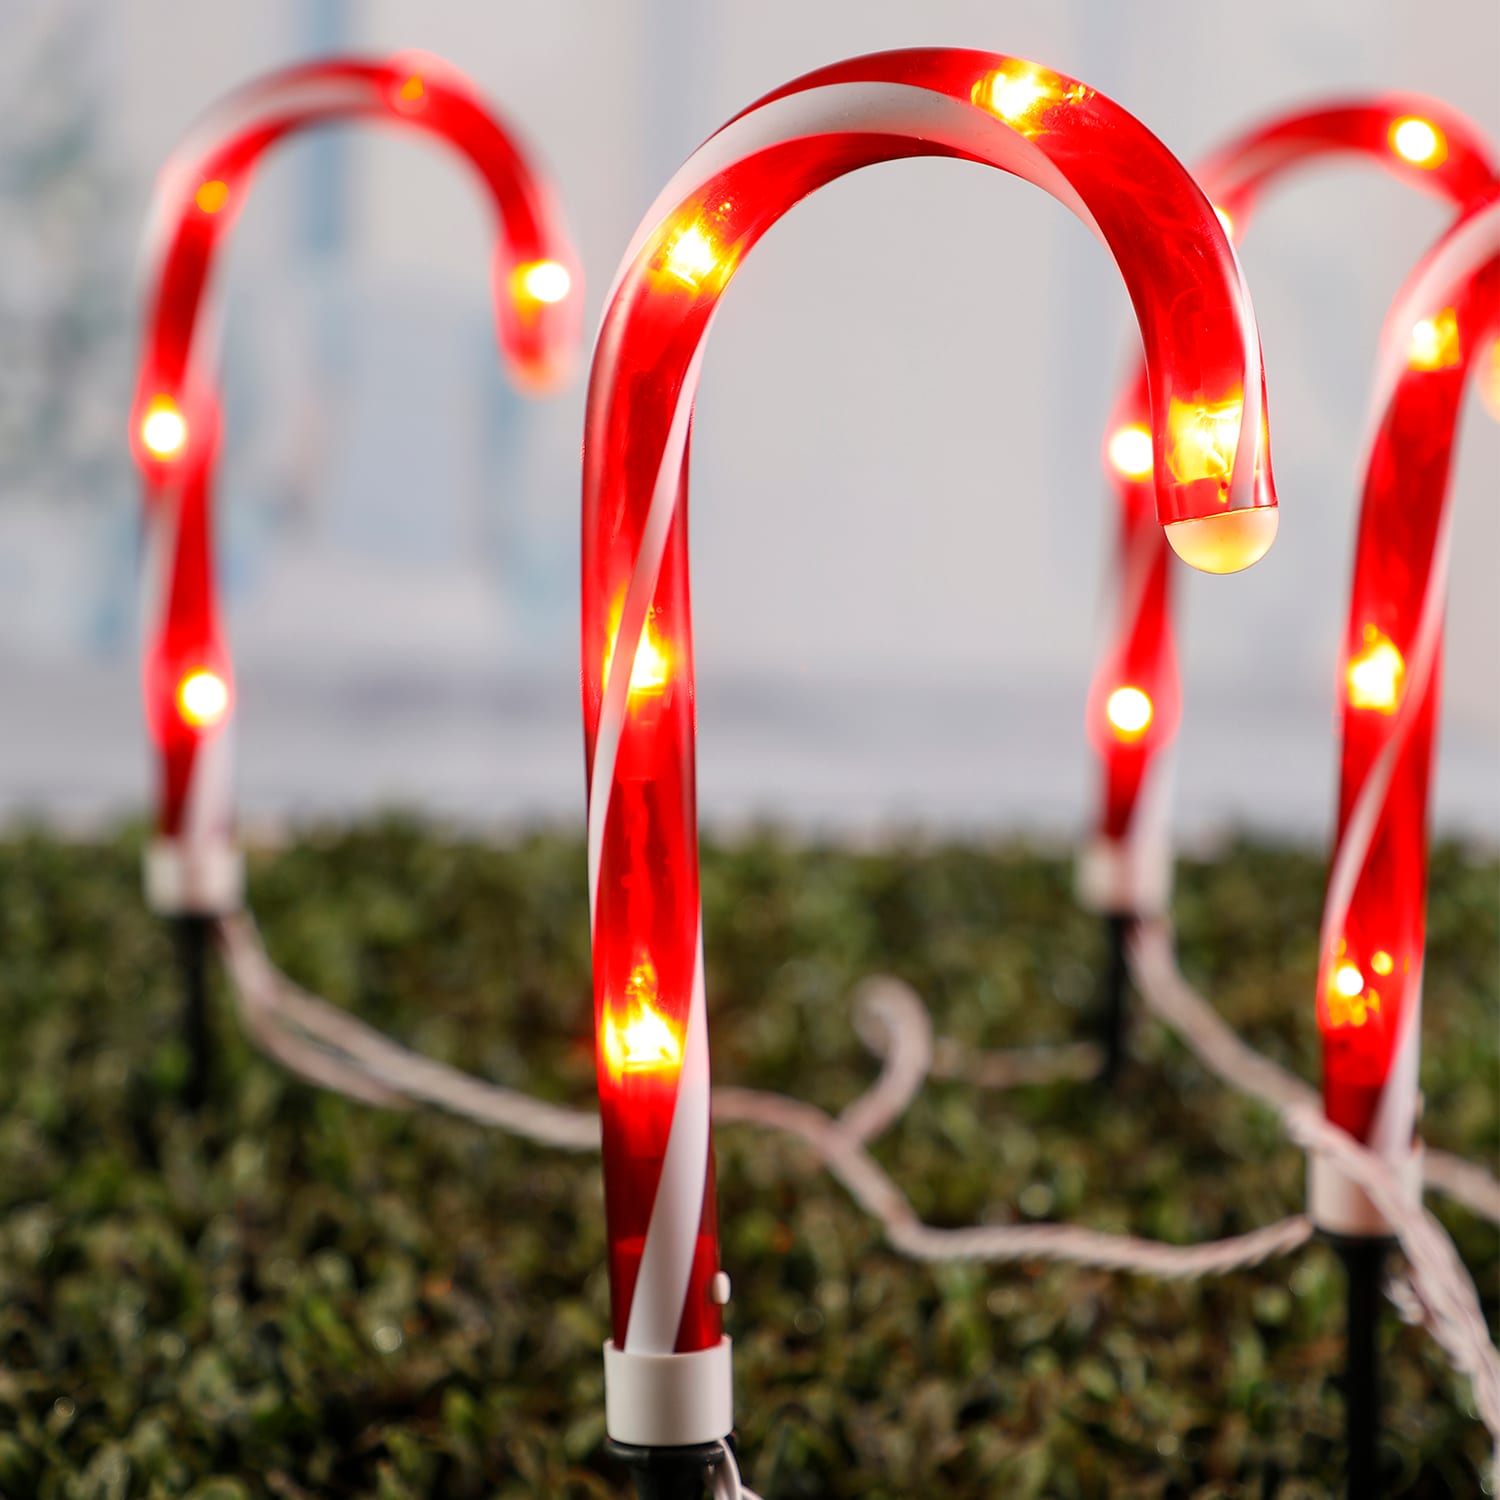 GIGALUMI Christmas Candy Cane Lights 10 LED Red Beads Glowed Waterproof UL Listed Outdoor Christmas Decorations 10 Pack Candy Cane Pathway Markers Outdoor 29 with 8 Lighting Modes